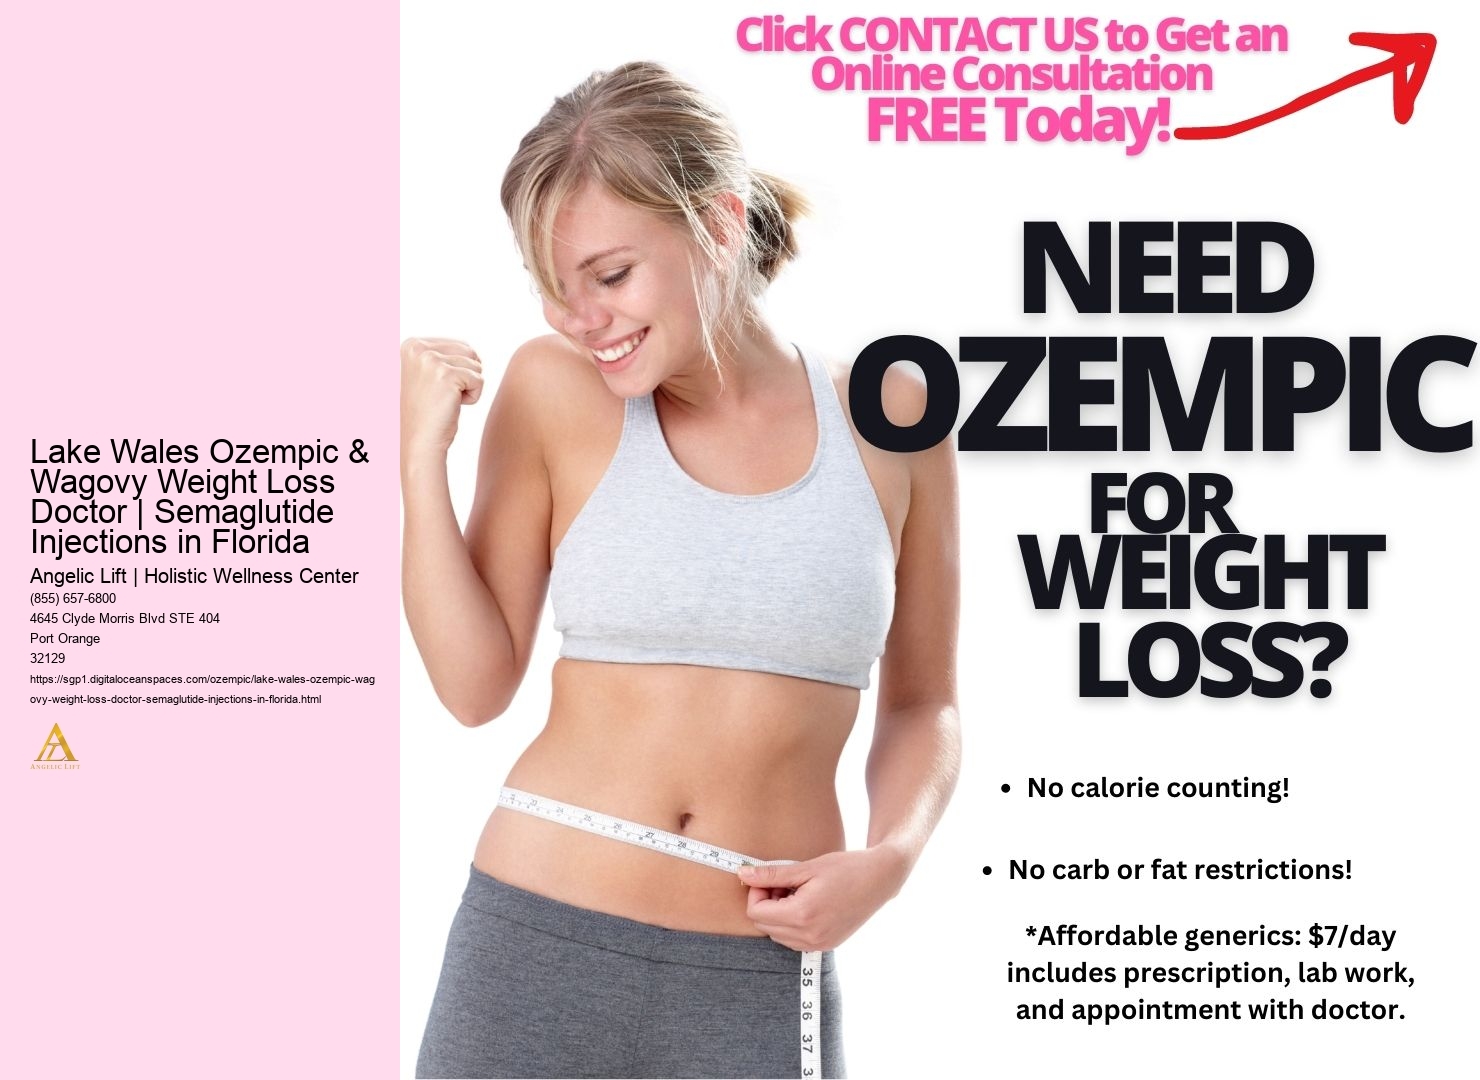 Lake Wales Ozempic & Wagovy Weight Loss Doctor | Semaglutide Injections in Florida